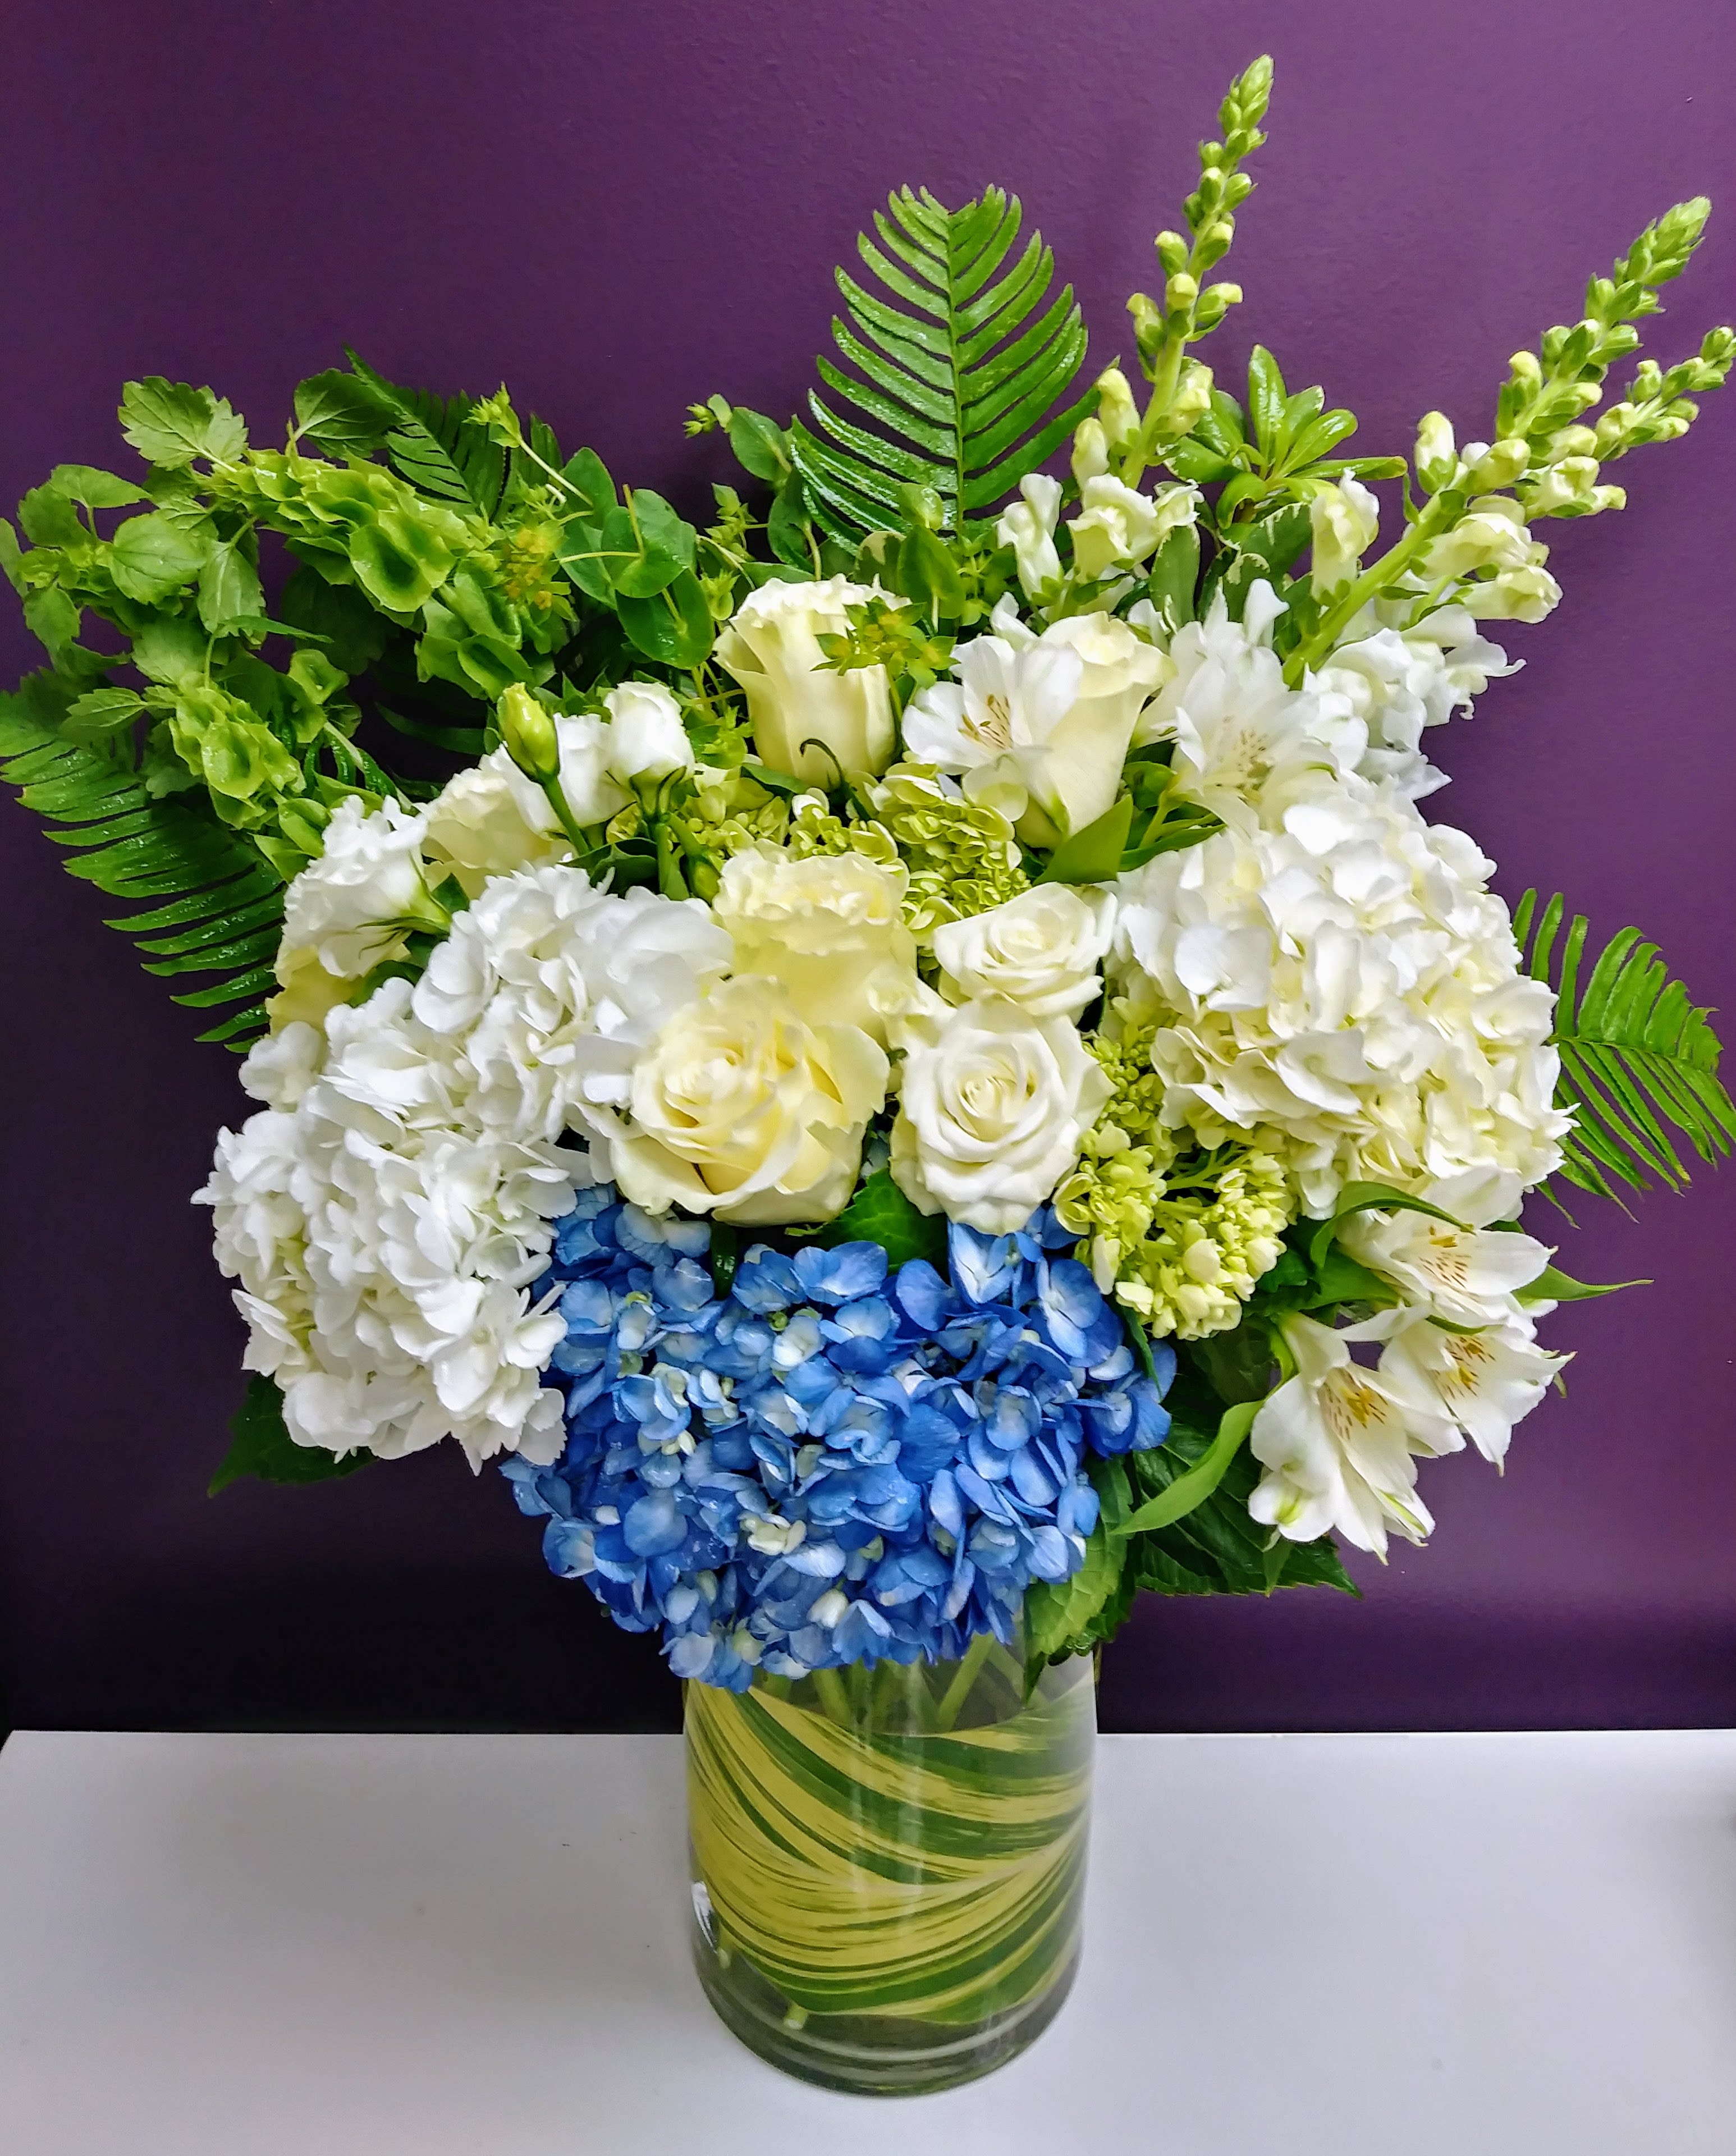  Ely's - Fill any day with the beauty of the European countryside . A sweet combination of Blue, White and Green Hydrangeas, White and cream Roses, White Lisianthus, Bells of Ireland and ferns. 